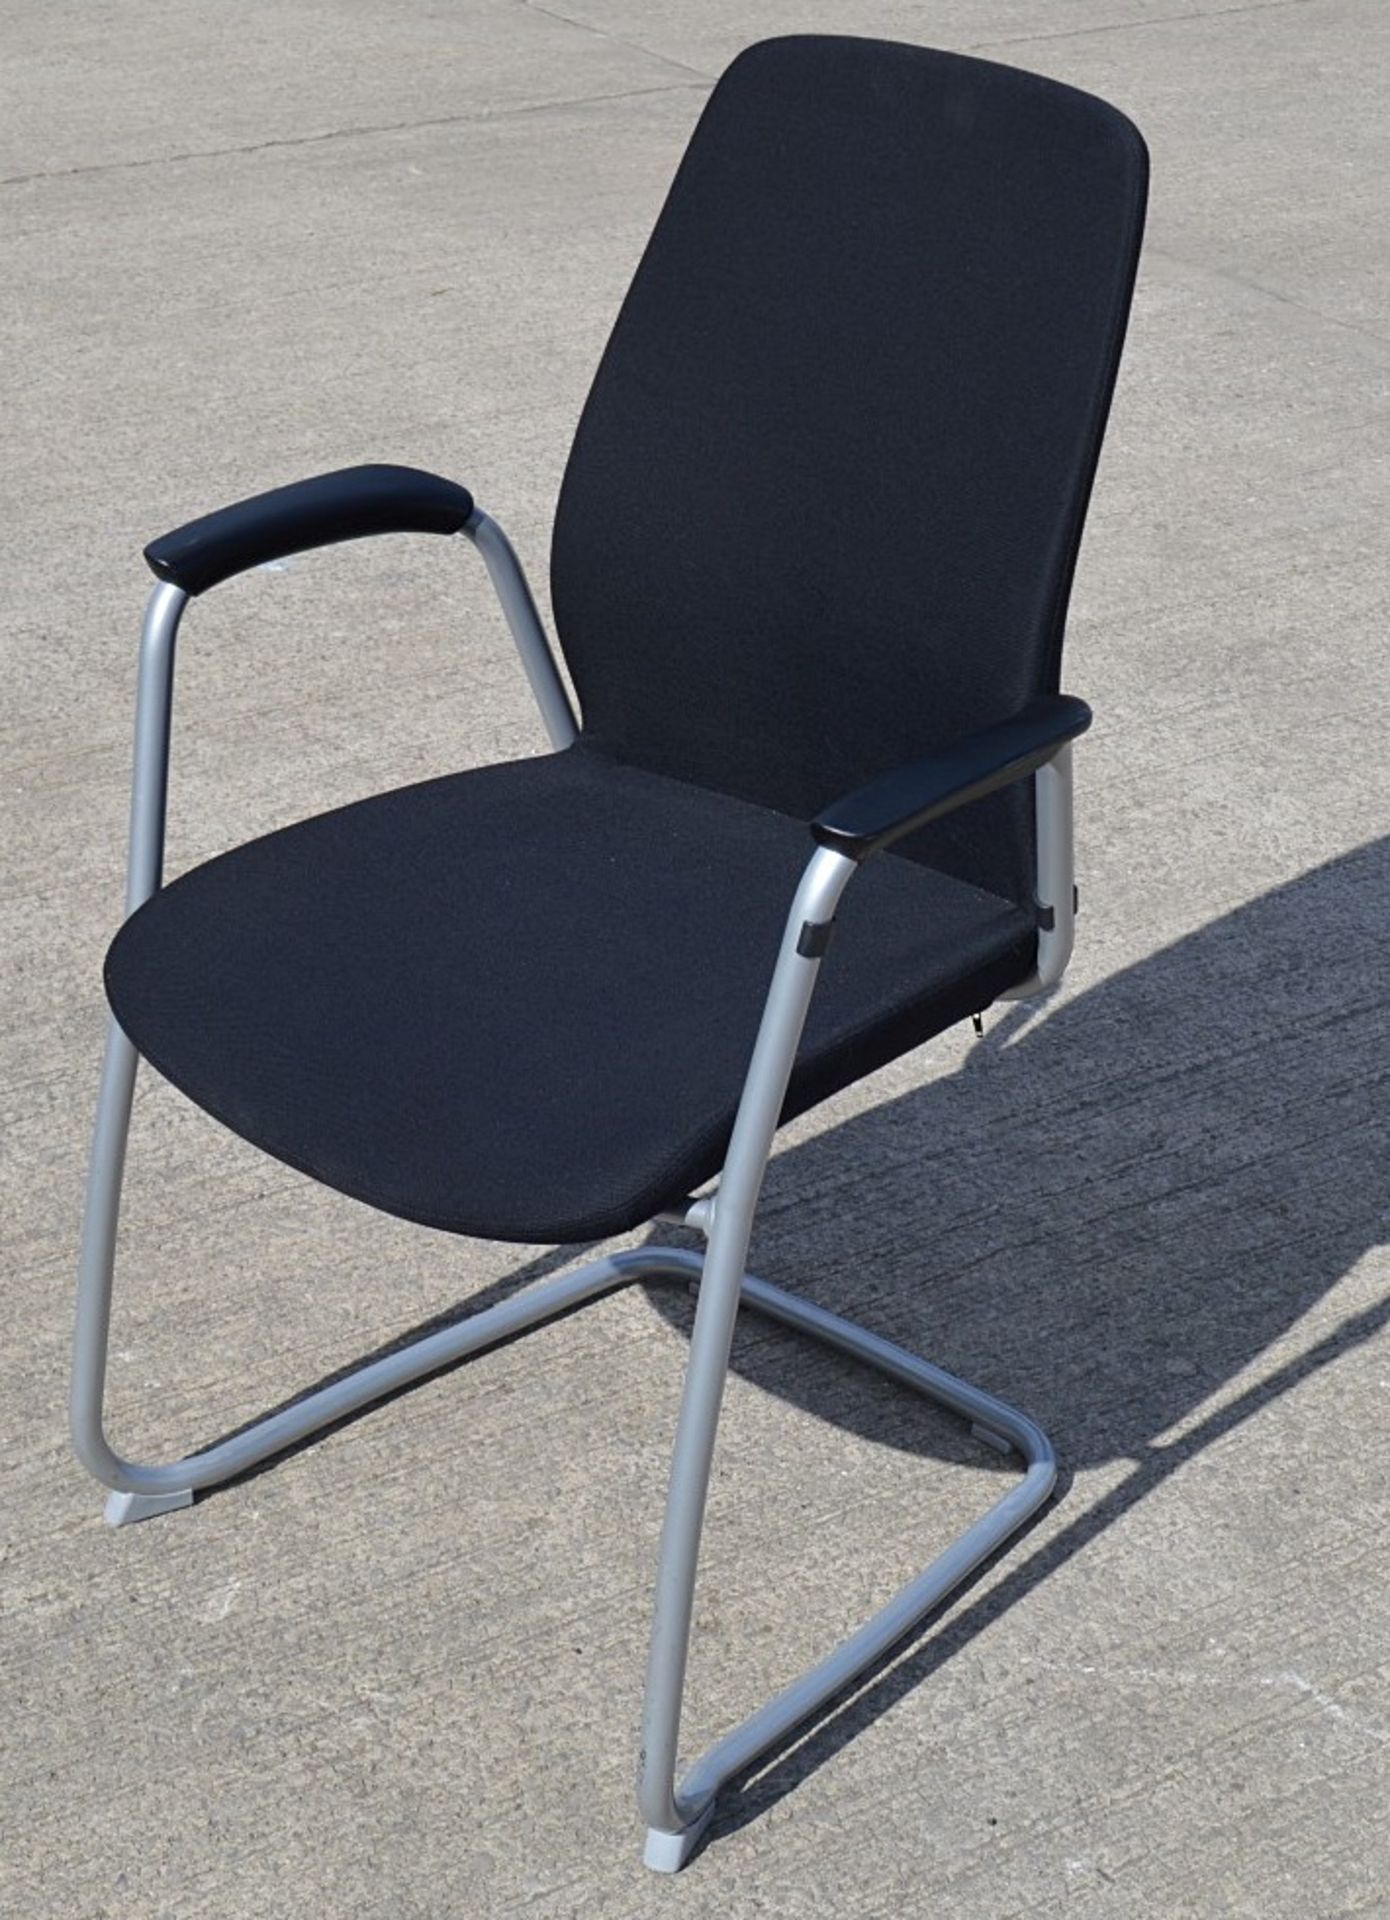 4 x Kinnarps 5000CV Meeting Chairs In Black - Dimensions: W59 x H92 x D53, Seat 45cm - Made In - Image 3 of 7